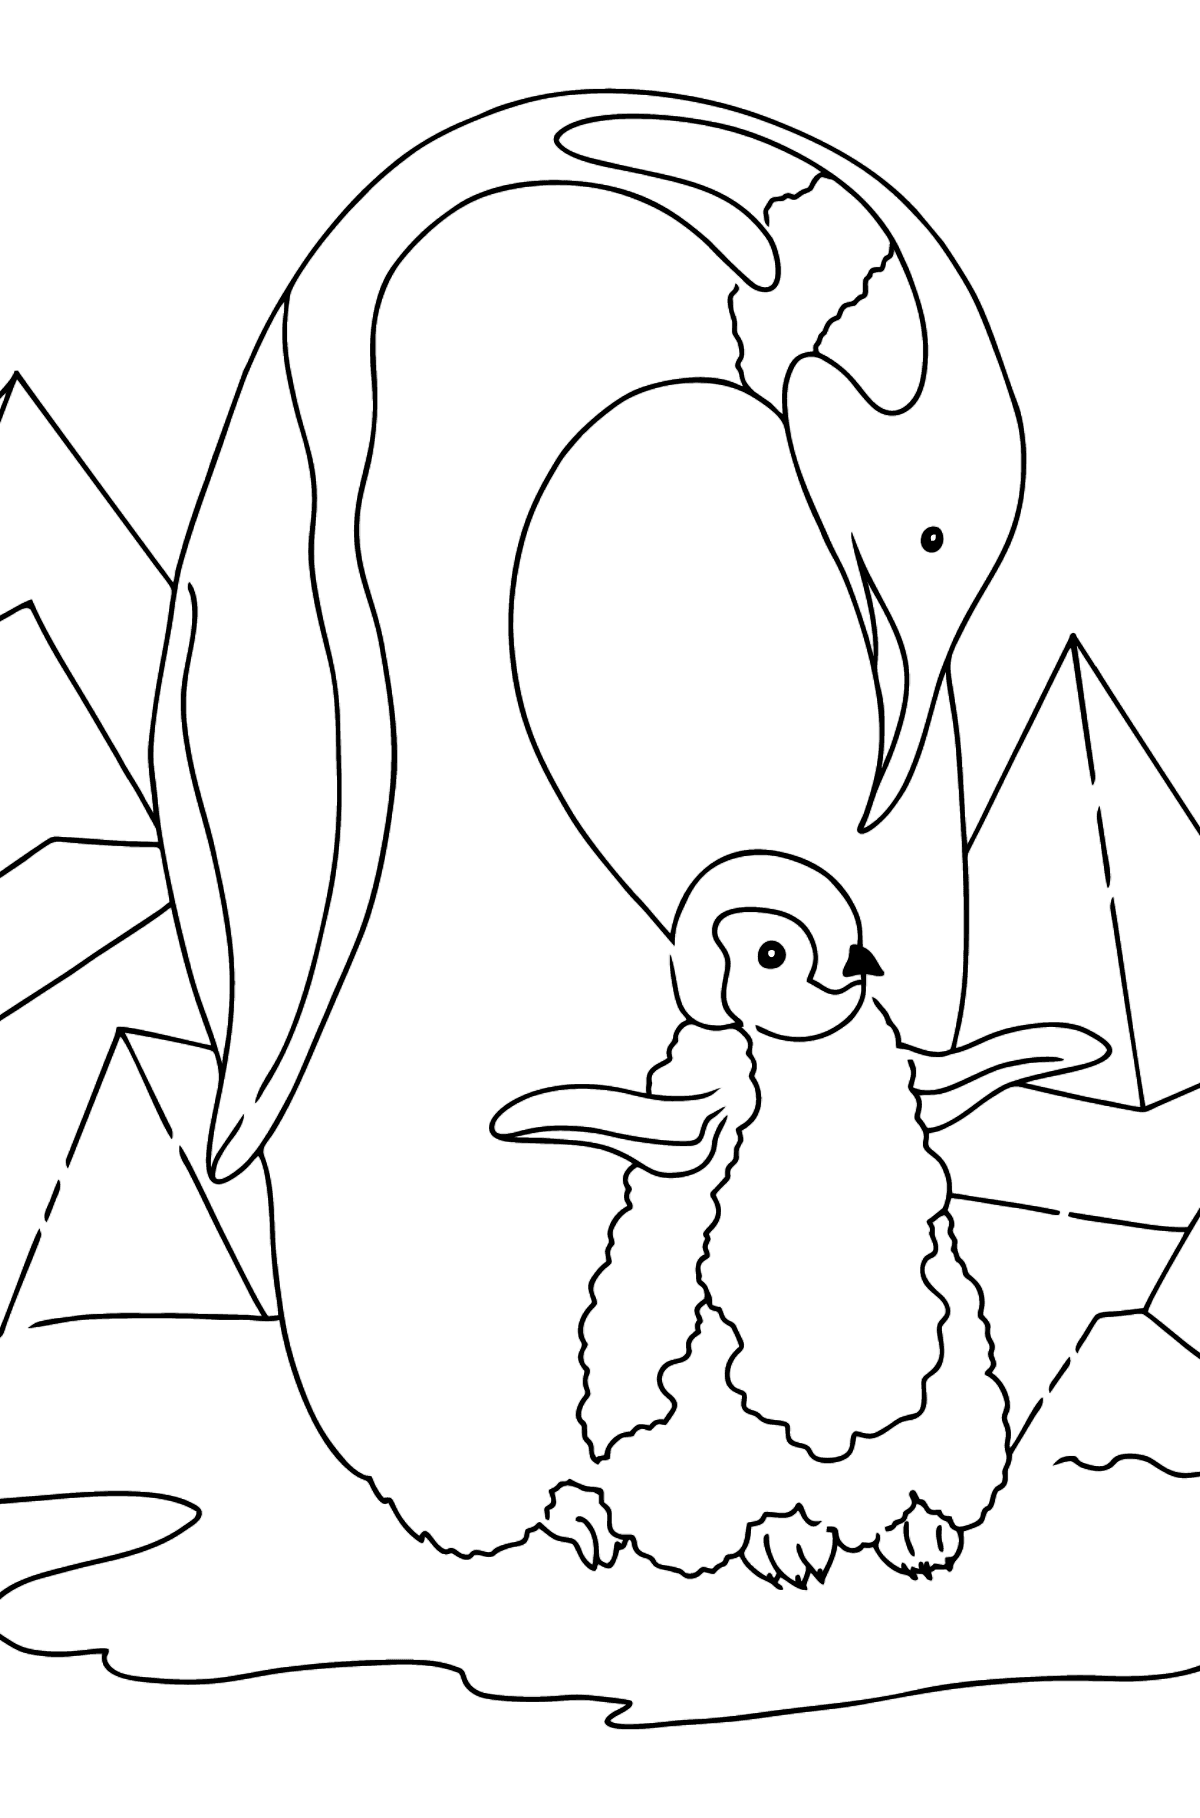 Coloring Page - A Caring Penguin - Coloring Pages for Kids